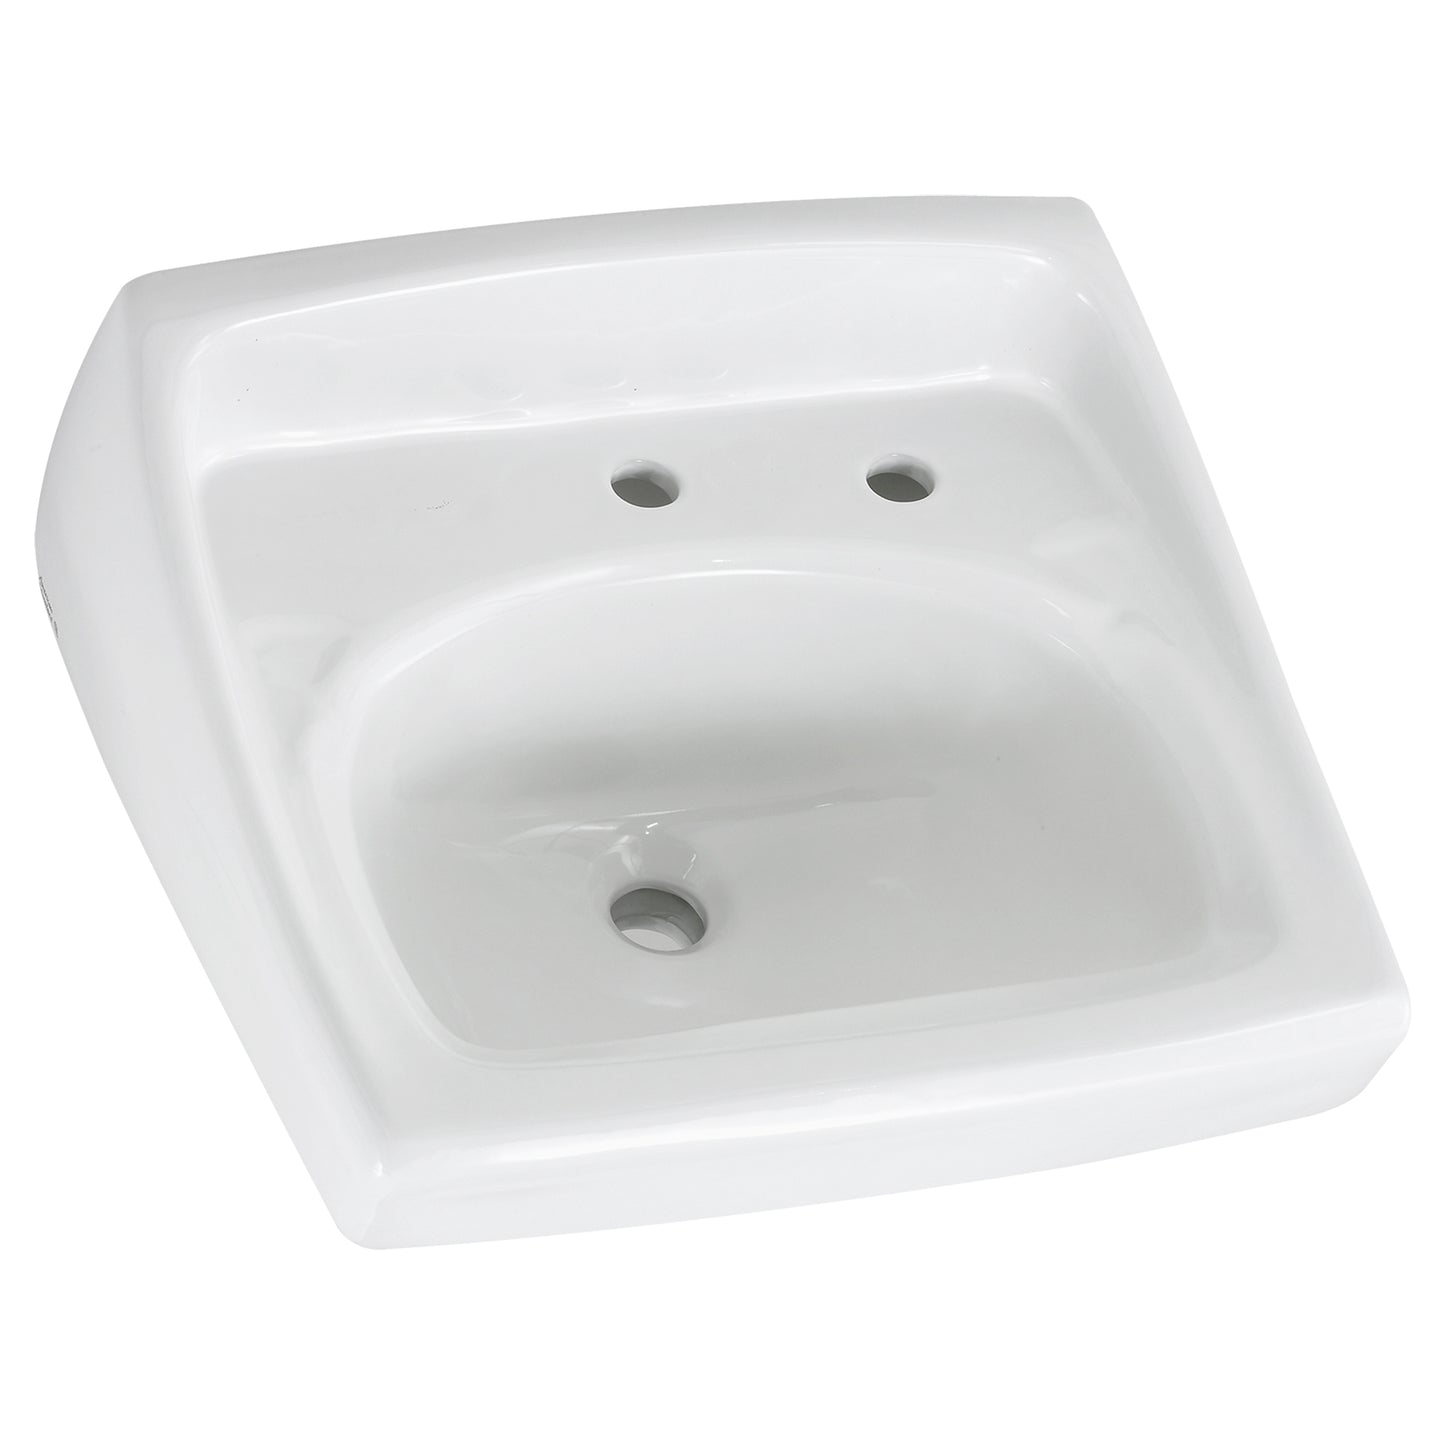 AMERICAN-STANDARD 0356137.020, Lucerne Wall-Hung Sink With Center Hole Only and Extra Right-Hand Hole in White